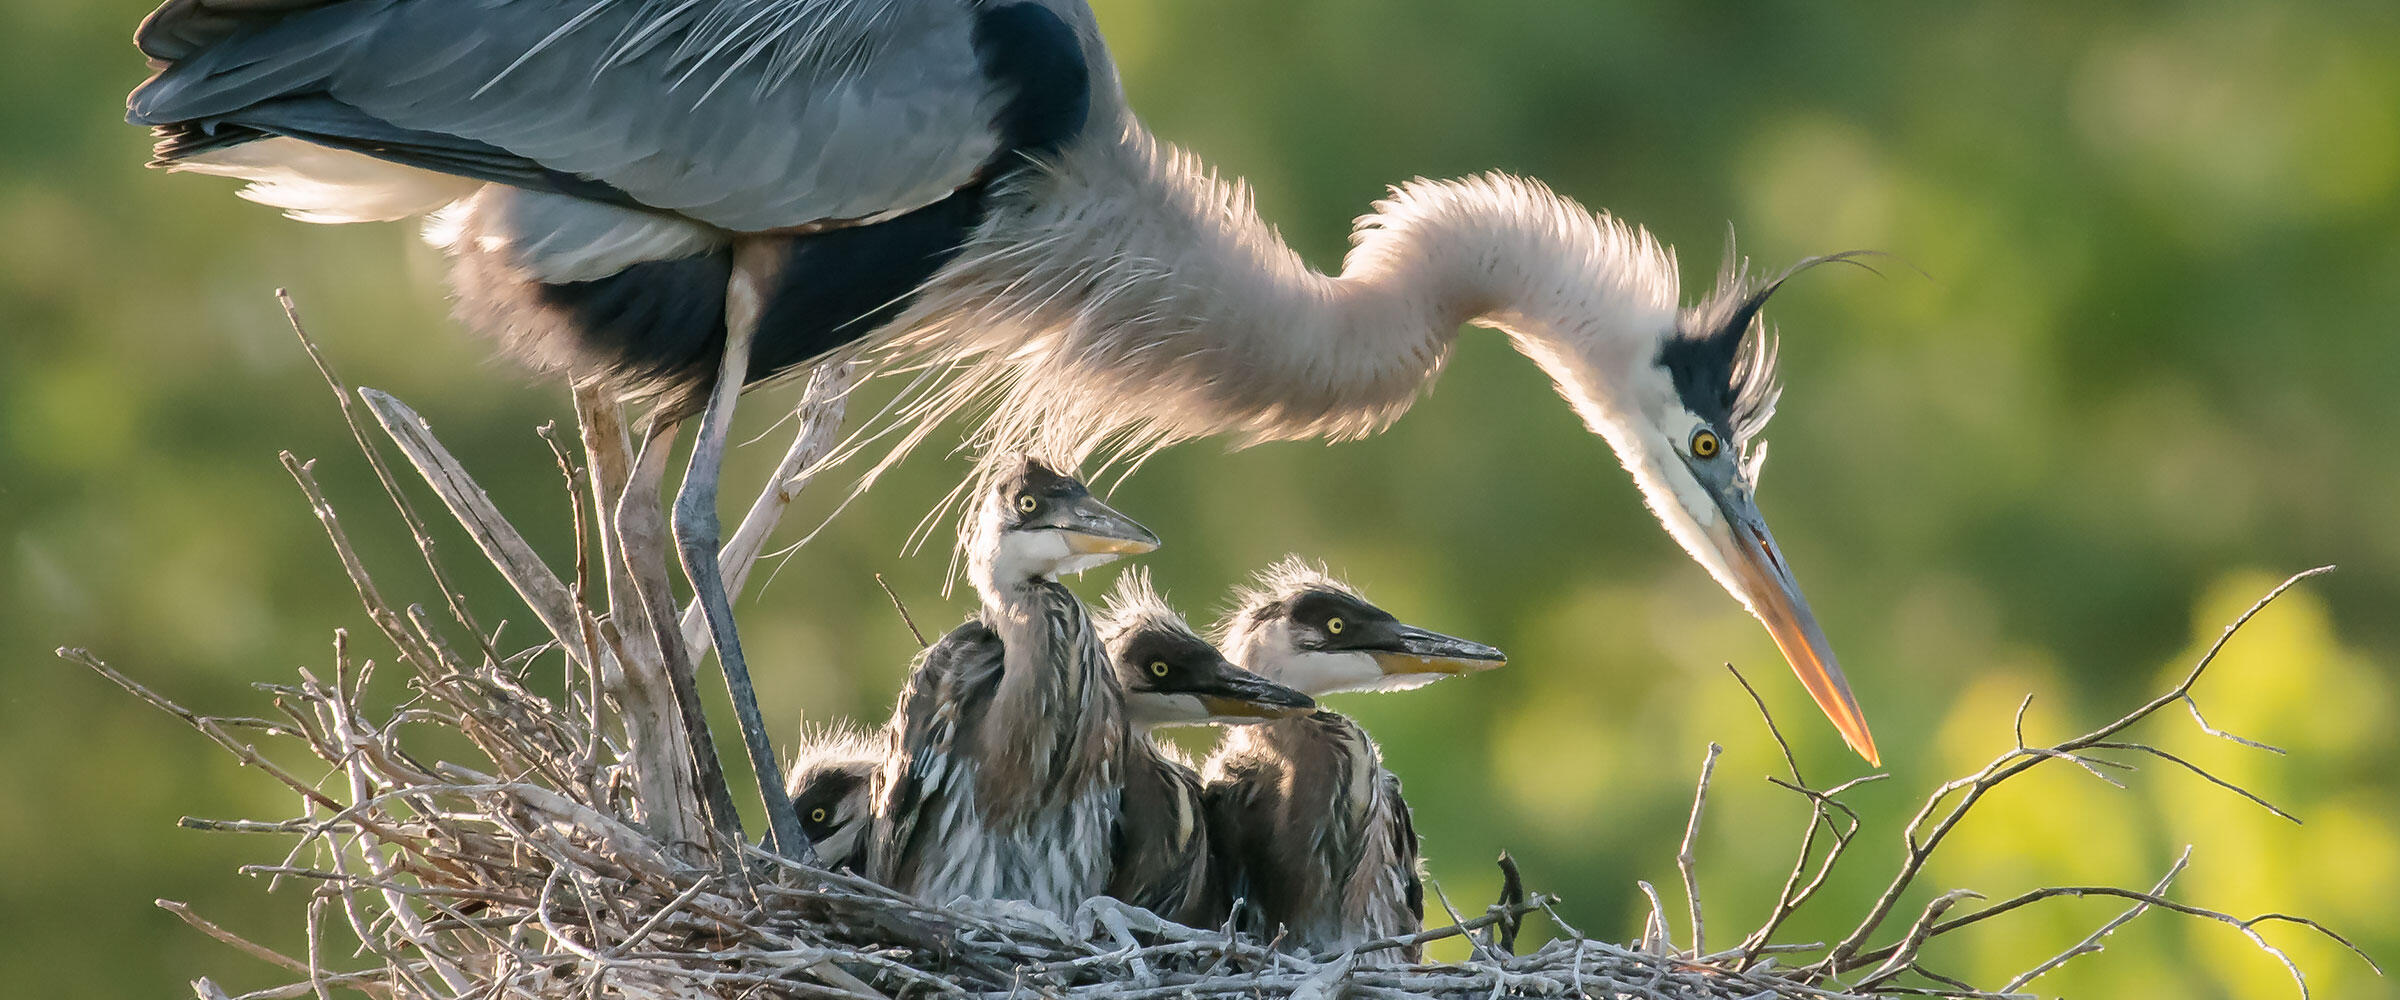 A Great Blue Heron stands over a nest with chicks. 